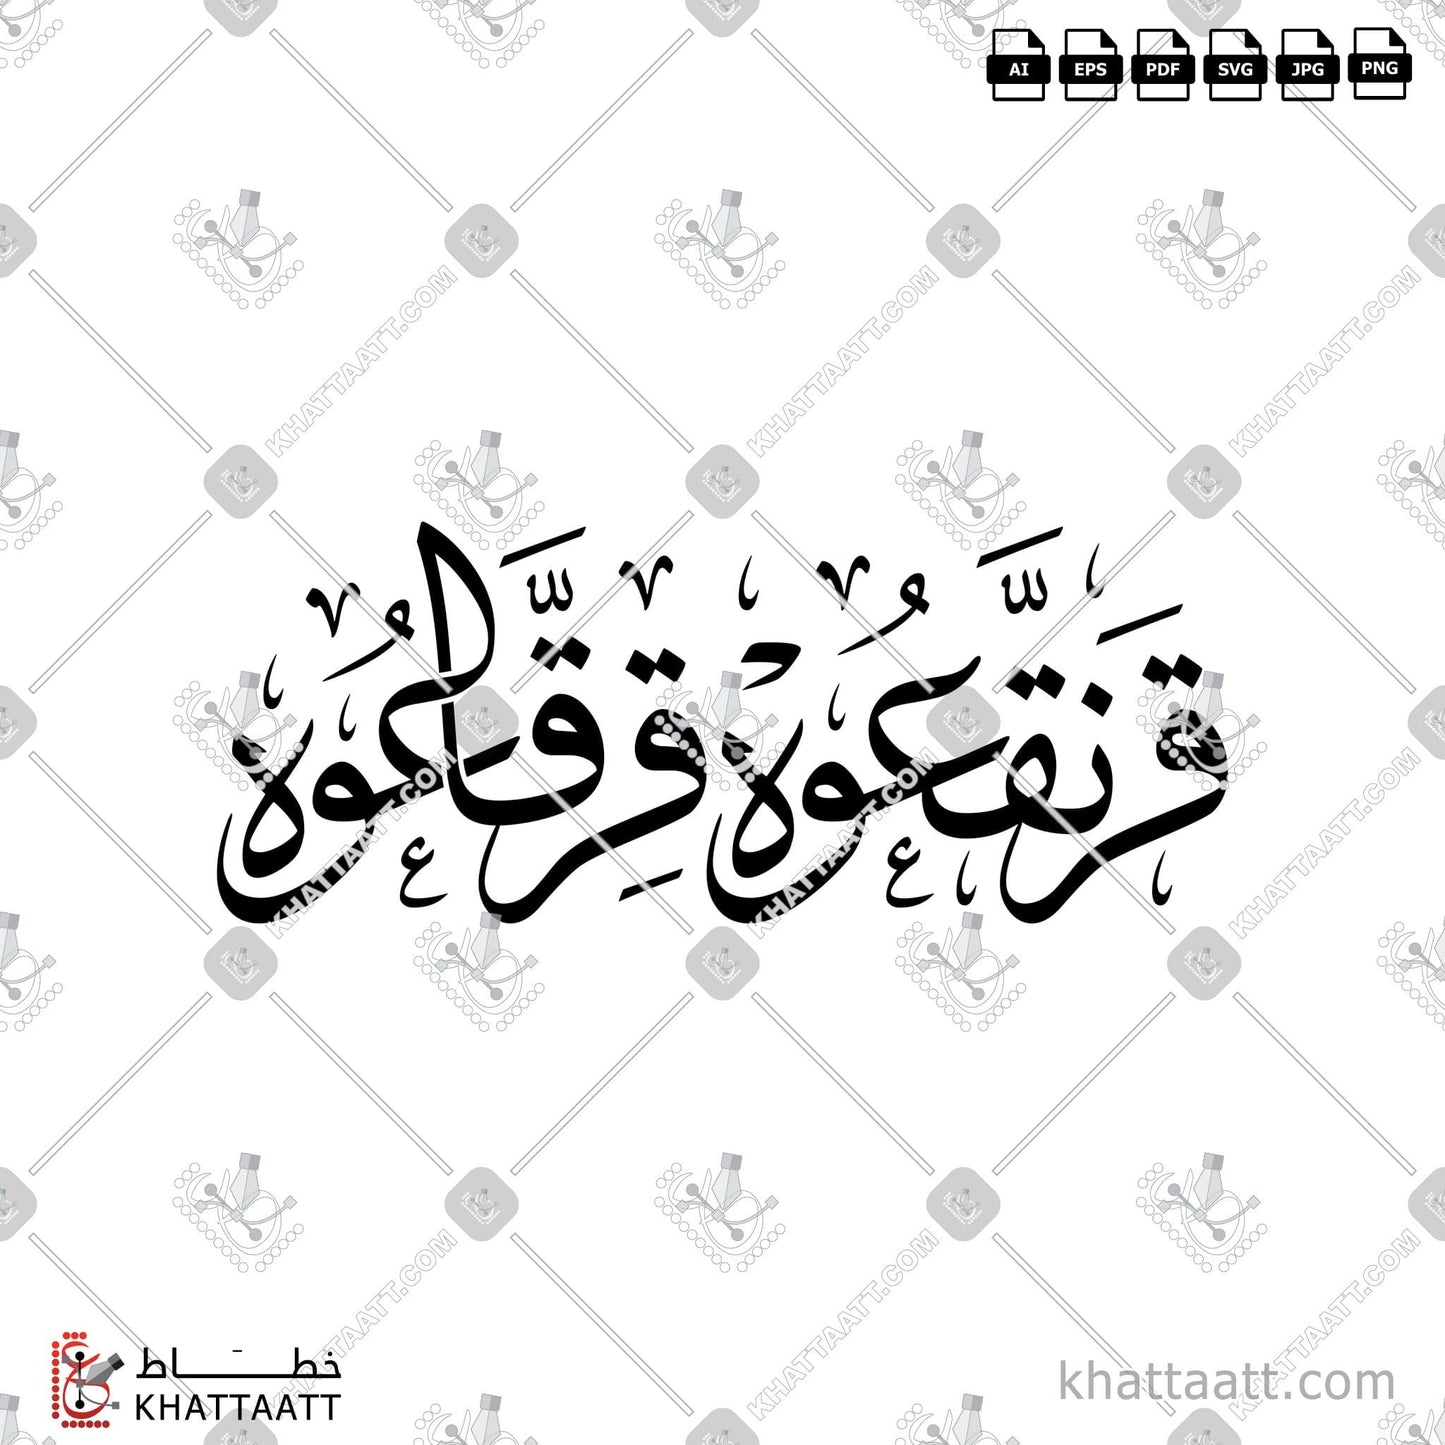 Download Arabic Calligraphy of قرنقعوه قرقاعوه in Thuluth - خط الثلث in vector and .png